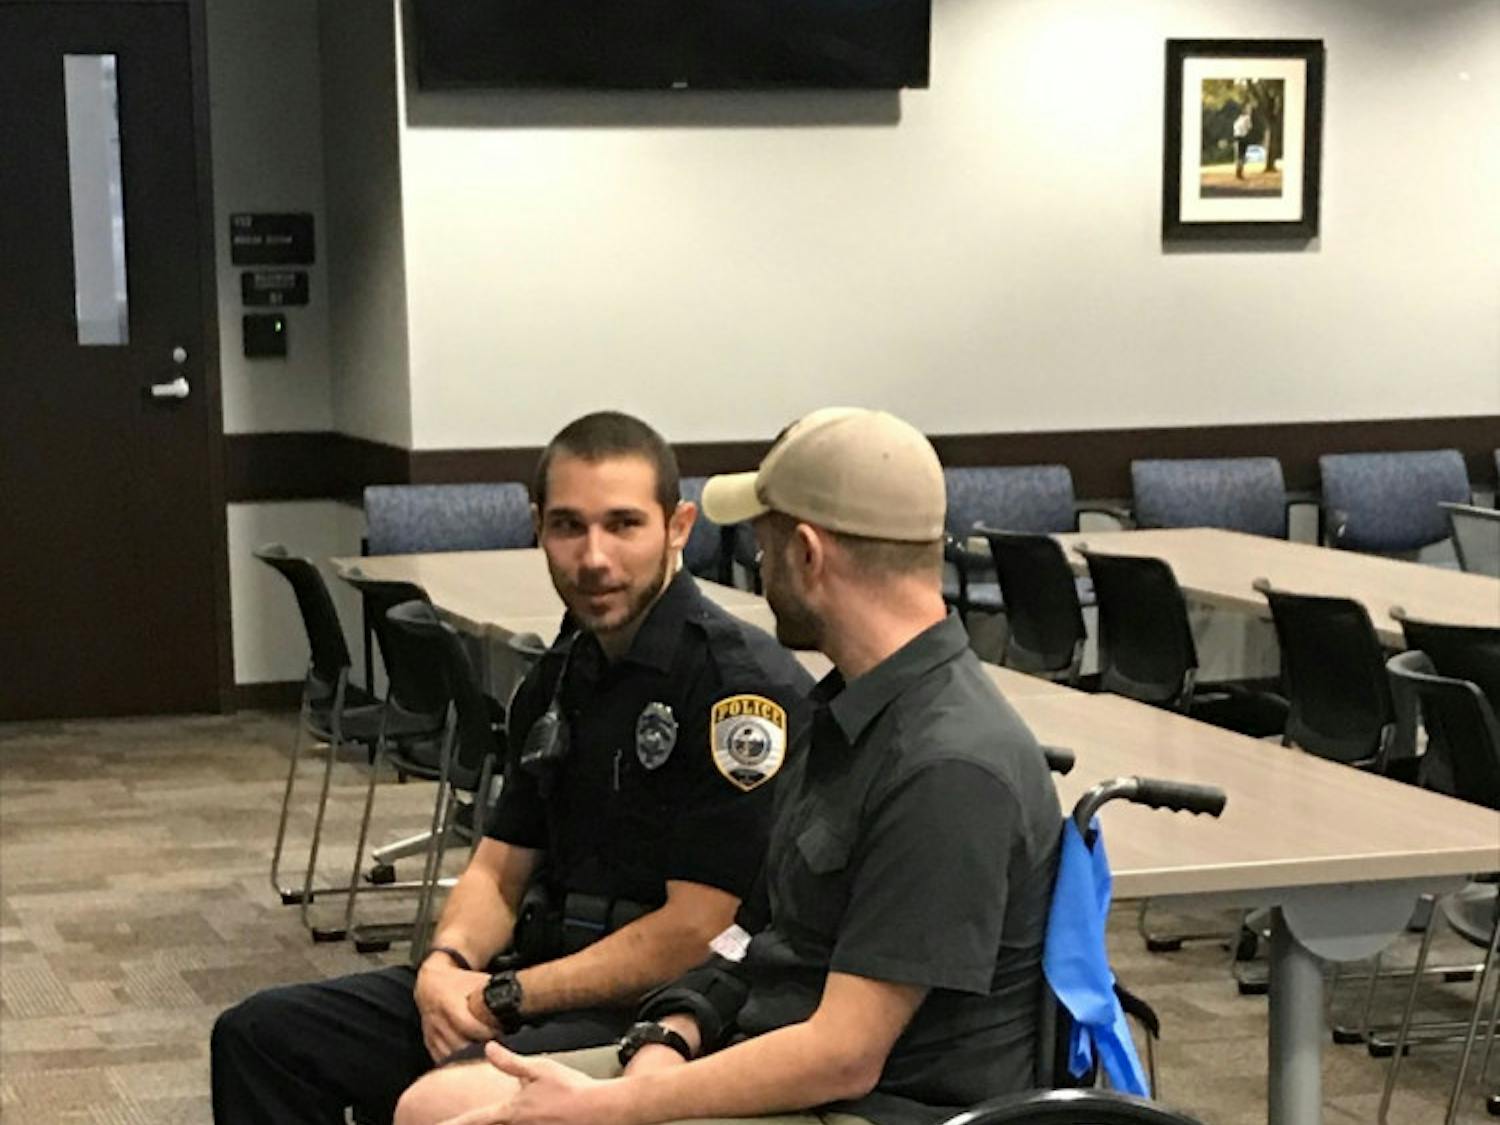 Joshua Roe, a 36-year-old UF doctoral student, and Gainesville Police officer Jack Salafrio meet on Thursday for the first time after Salafrio responded to a crash on Jan. 6 and rescued Roe. Roe was run over by his own car, which was stolen, police said.
&nbsp;